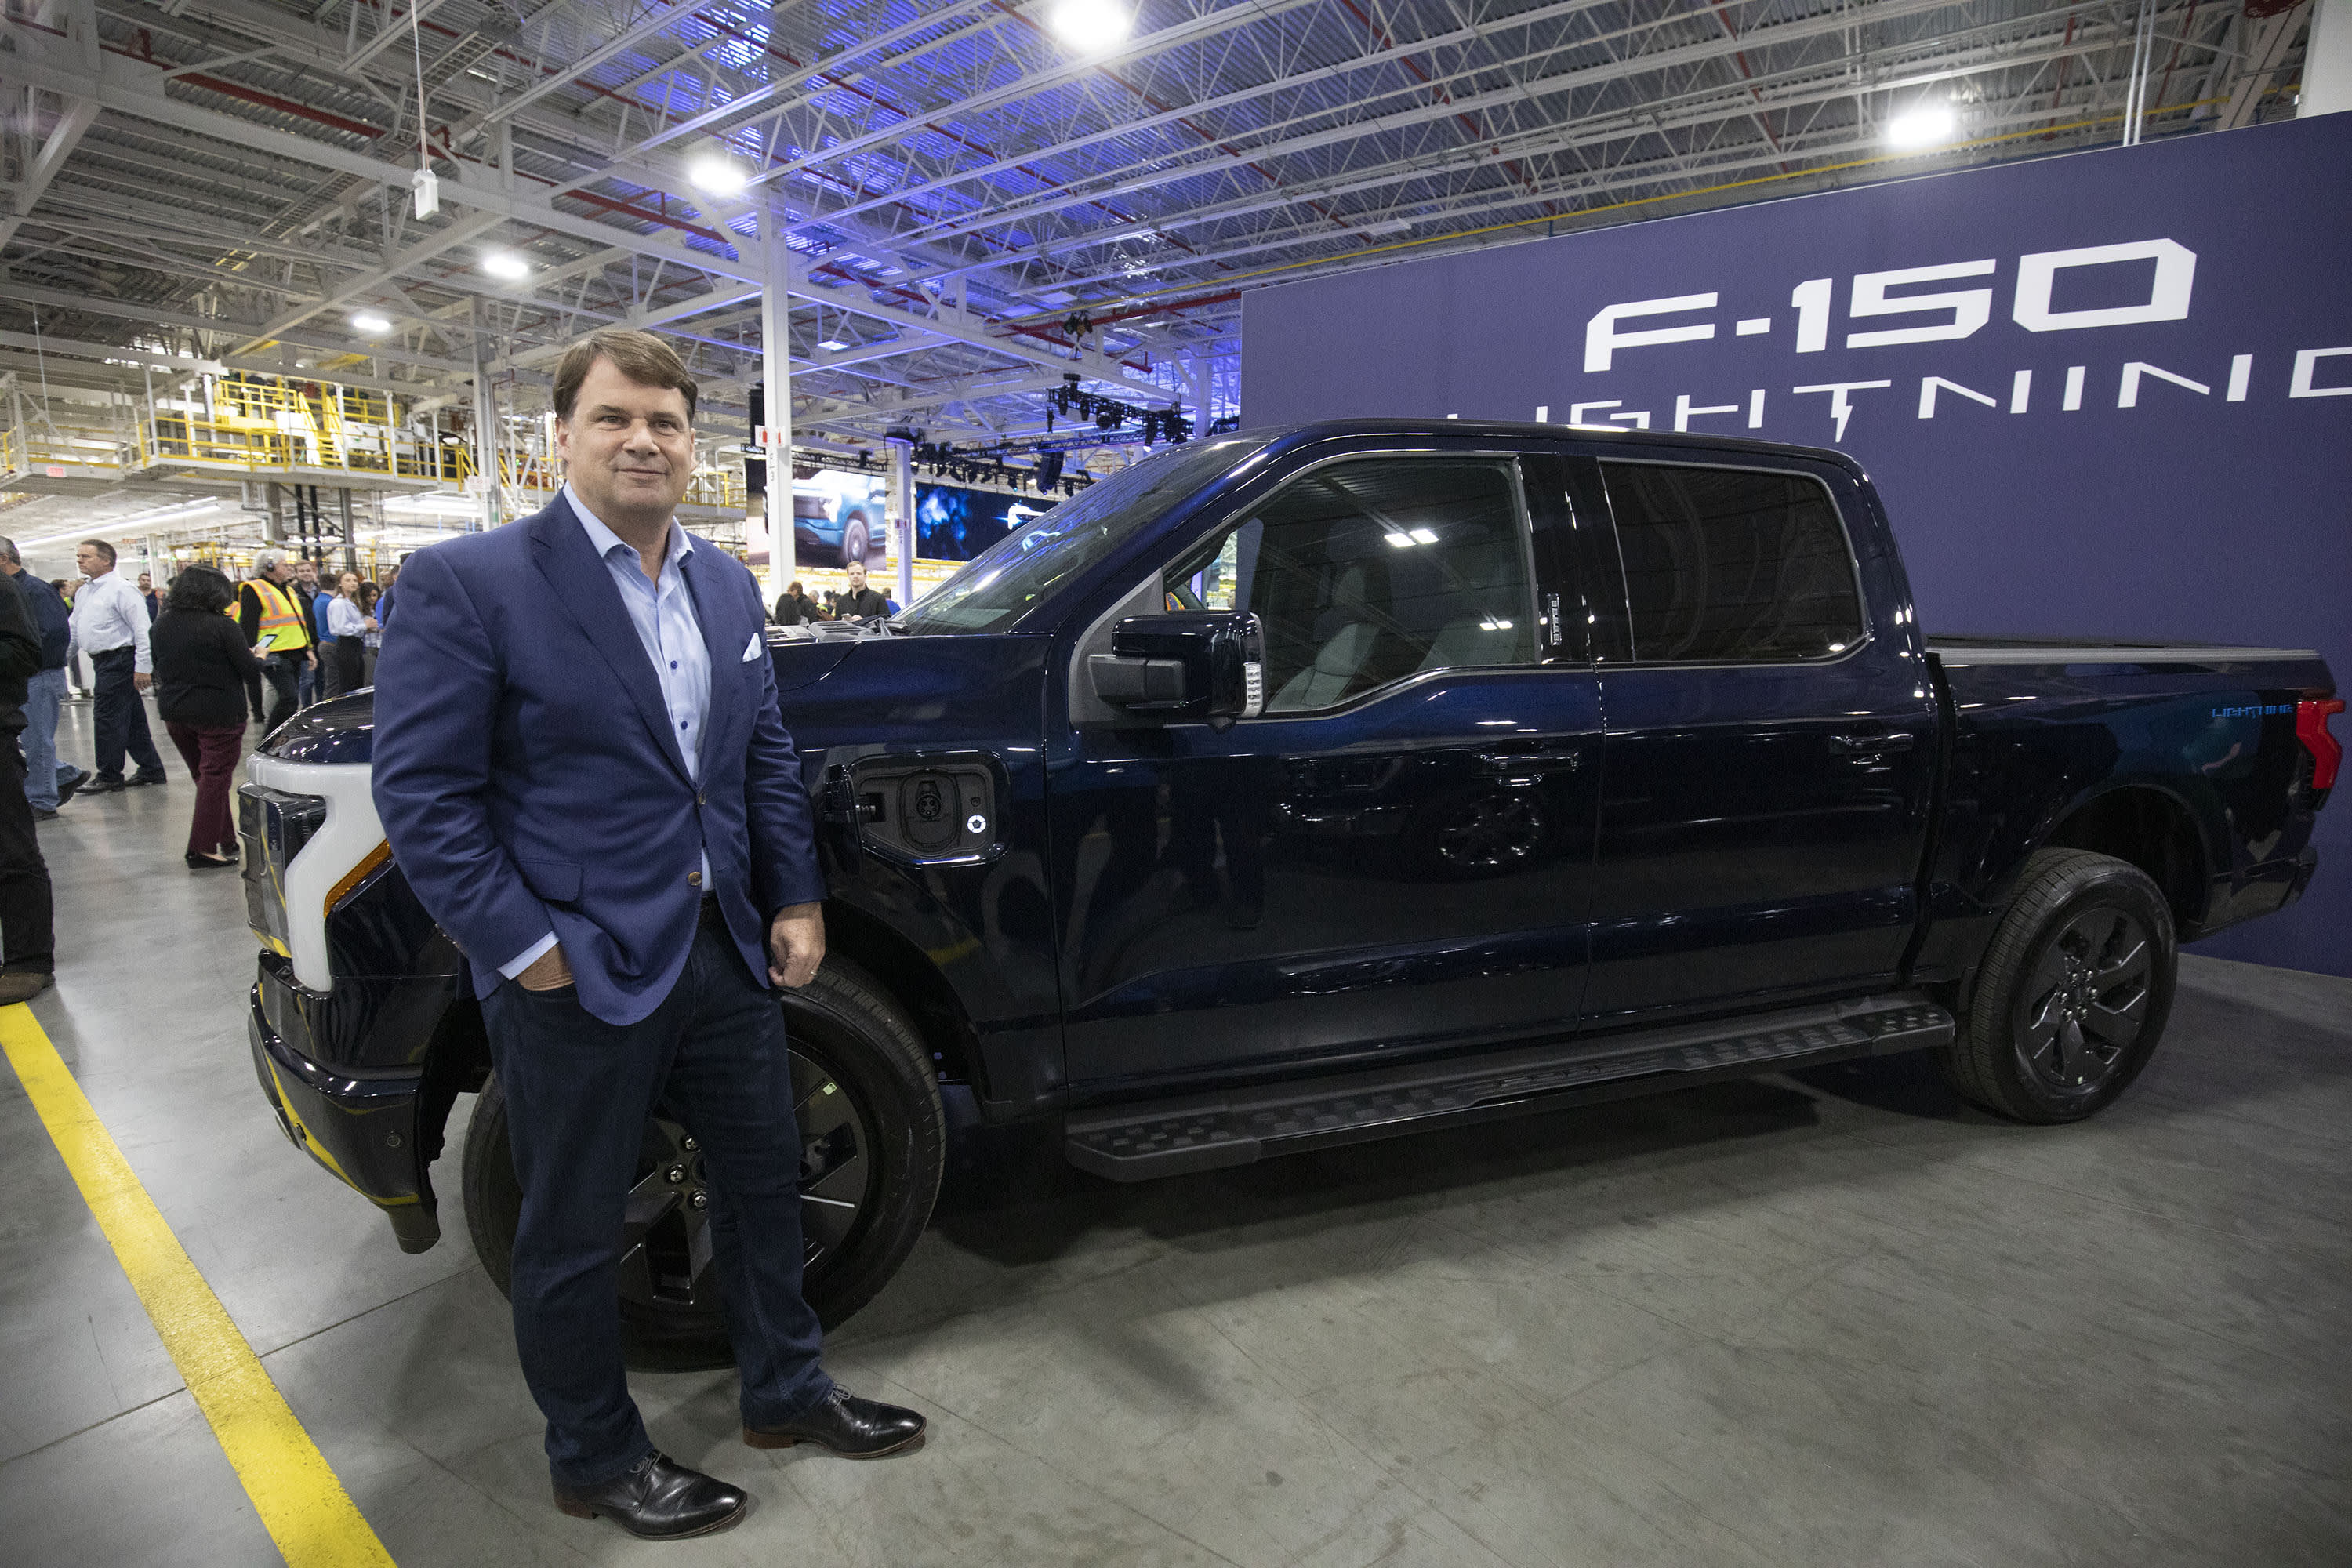 Here are the questions we have for Ford and its CEO Jim Farley about their latest EV price cuts